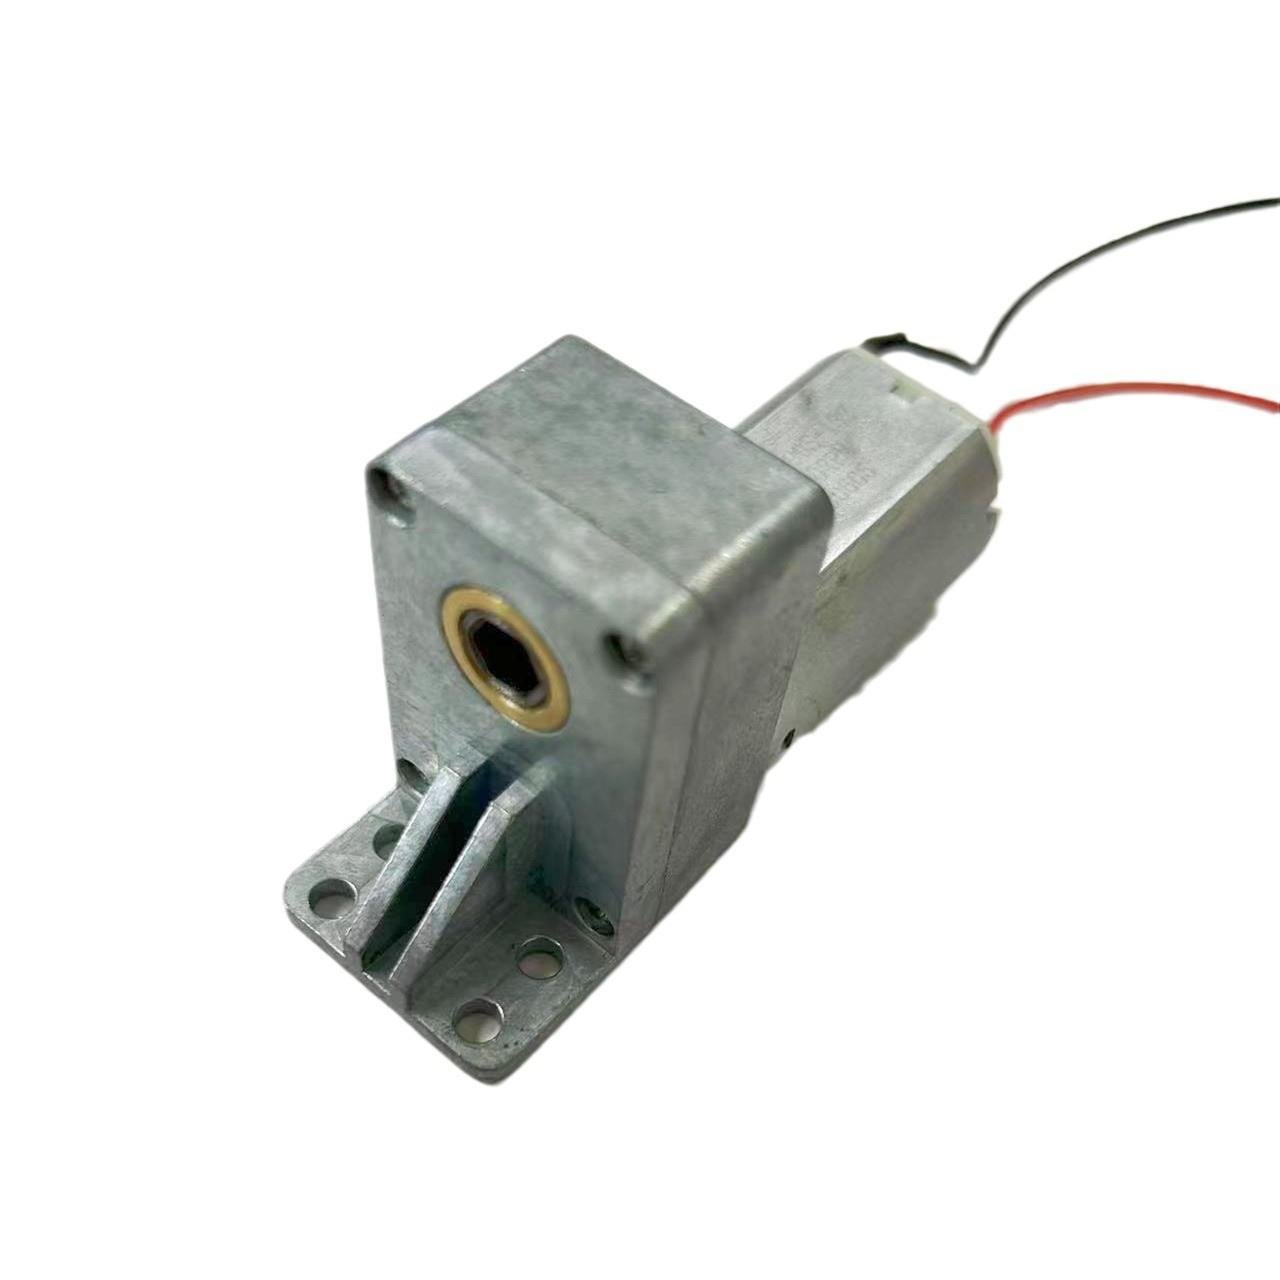 Lifting window geared motor, lifting structure motor 2